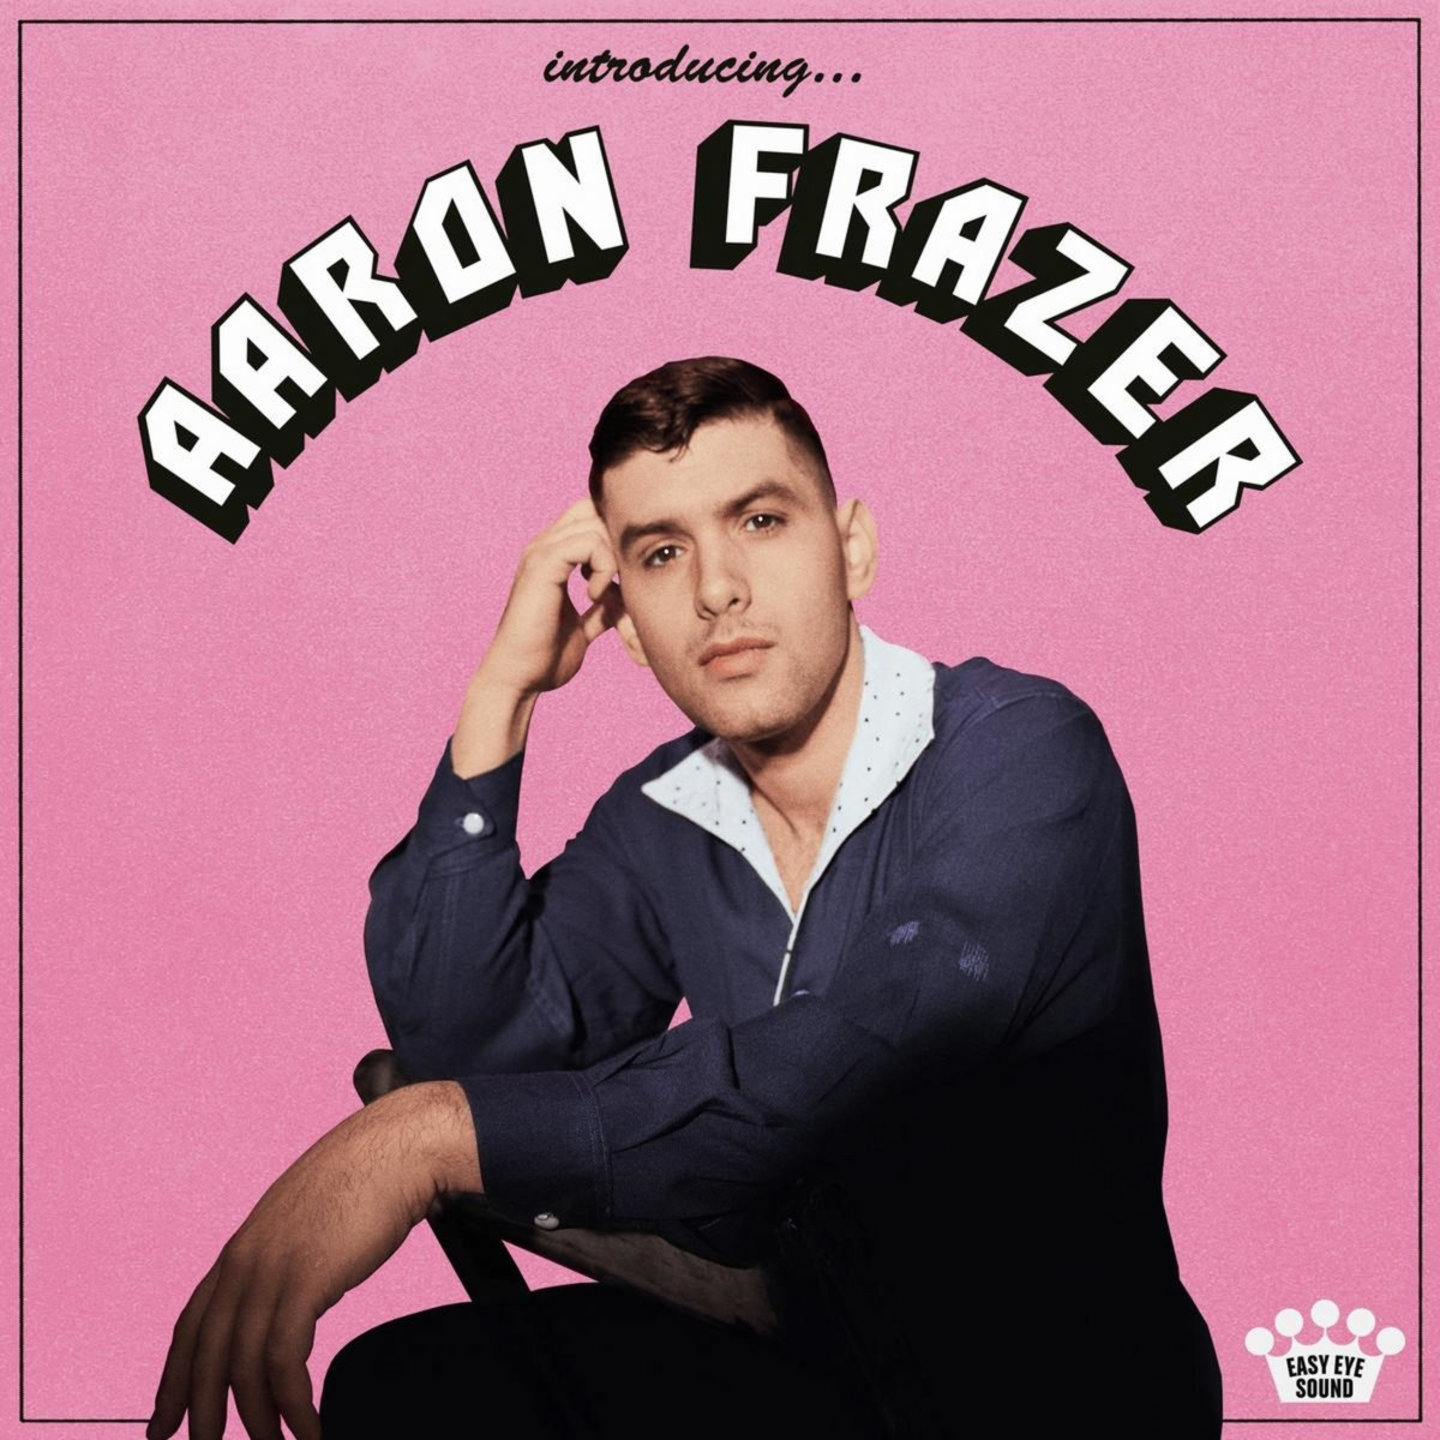 AARON FRAZER - Introducing... LP Indie Exclusive Limited Edition Translucent Pink Glass LP